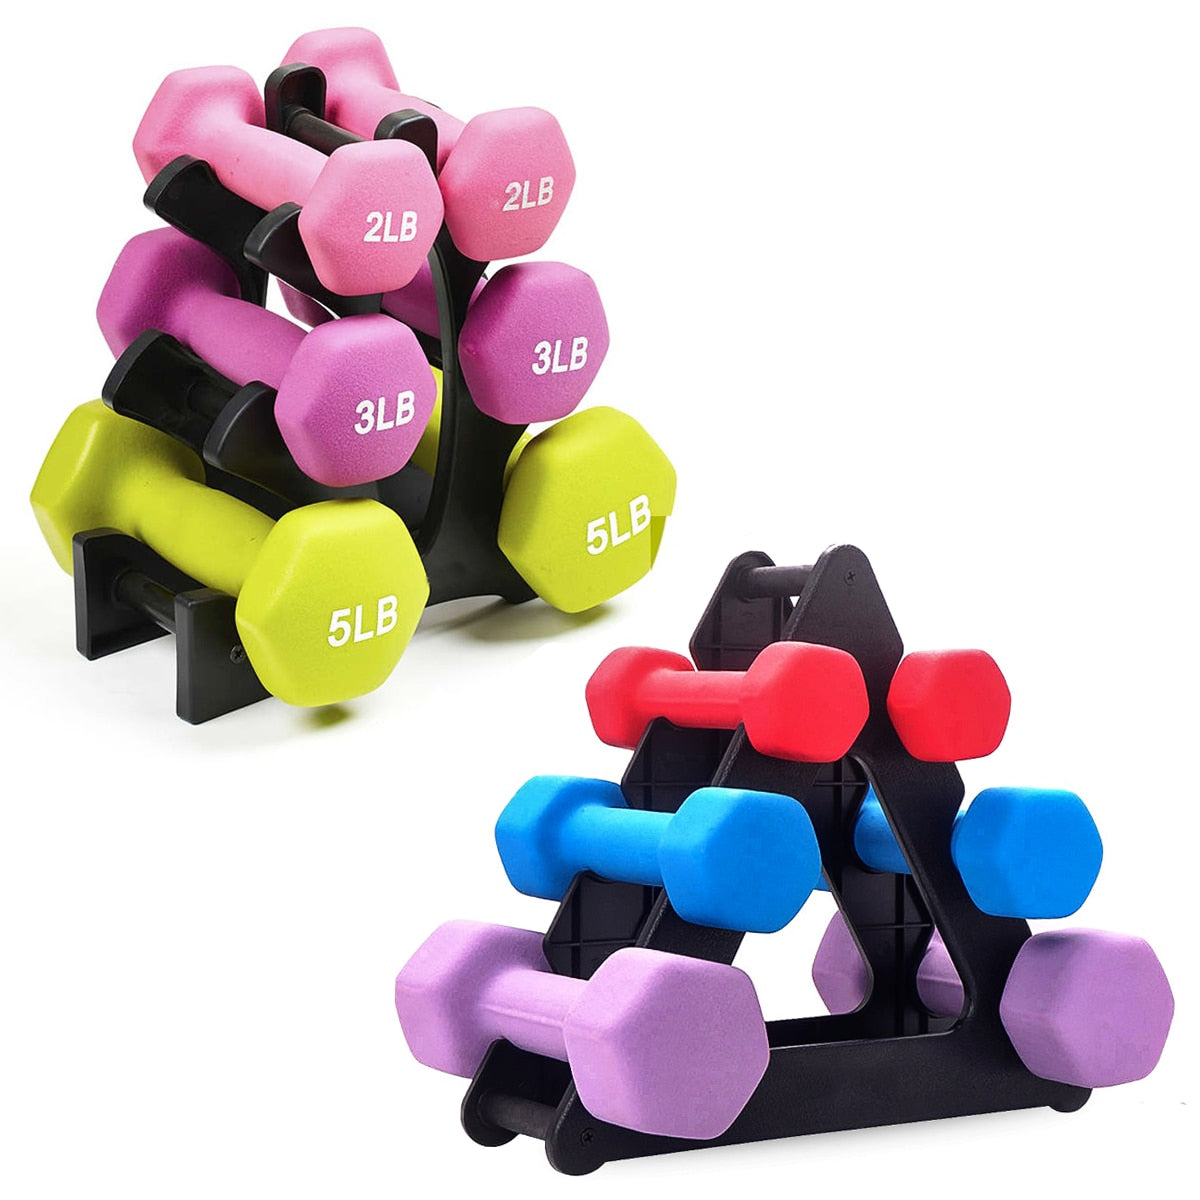 Triangle dumbbell stand for home